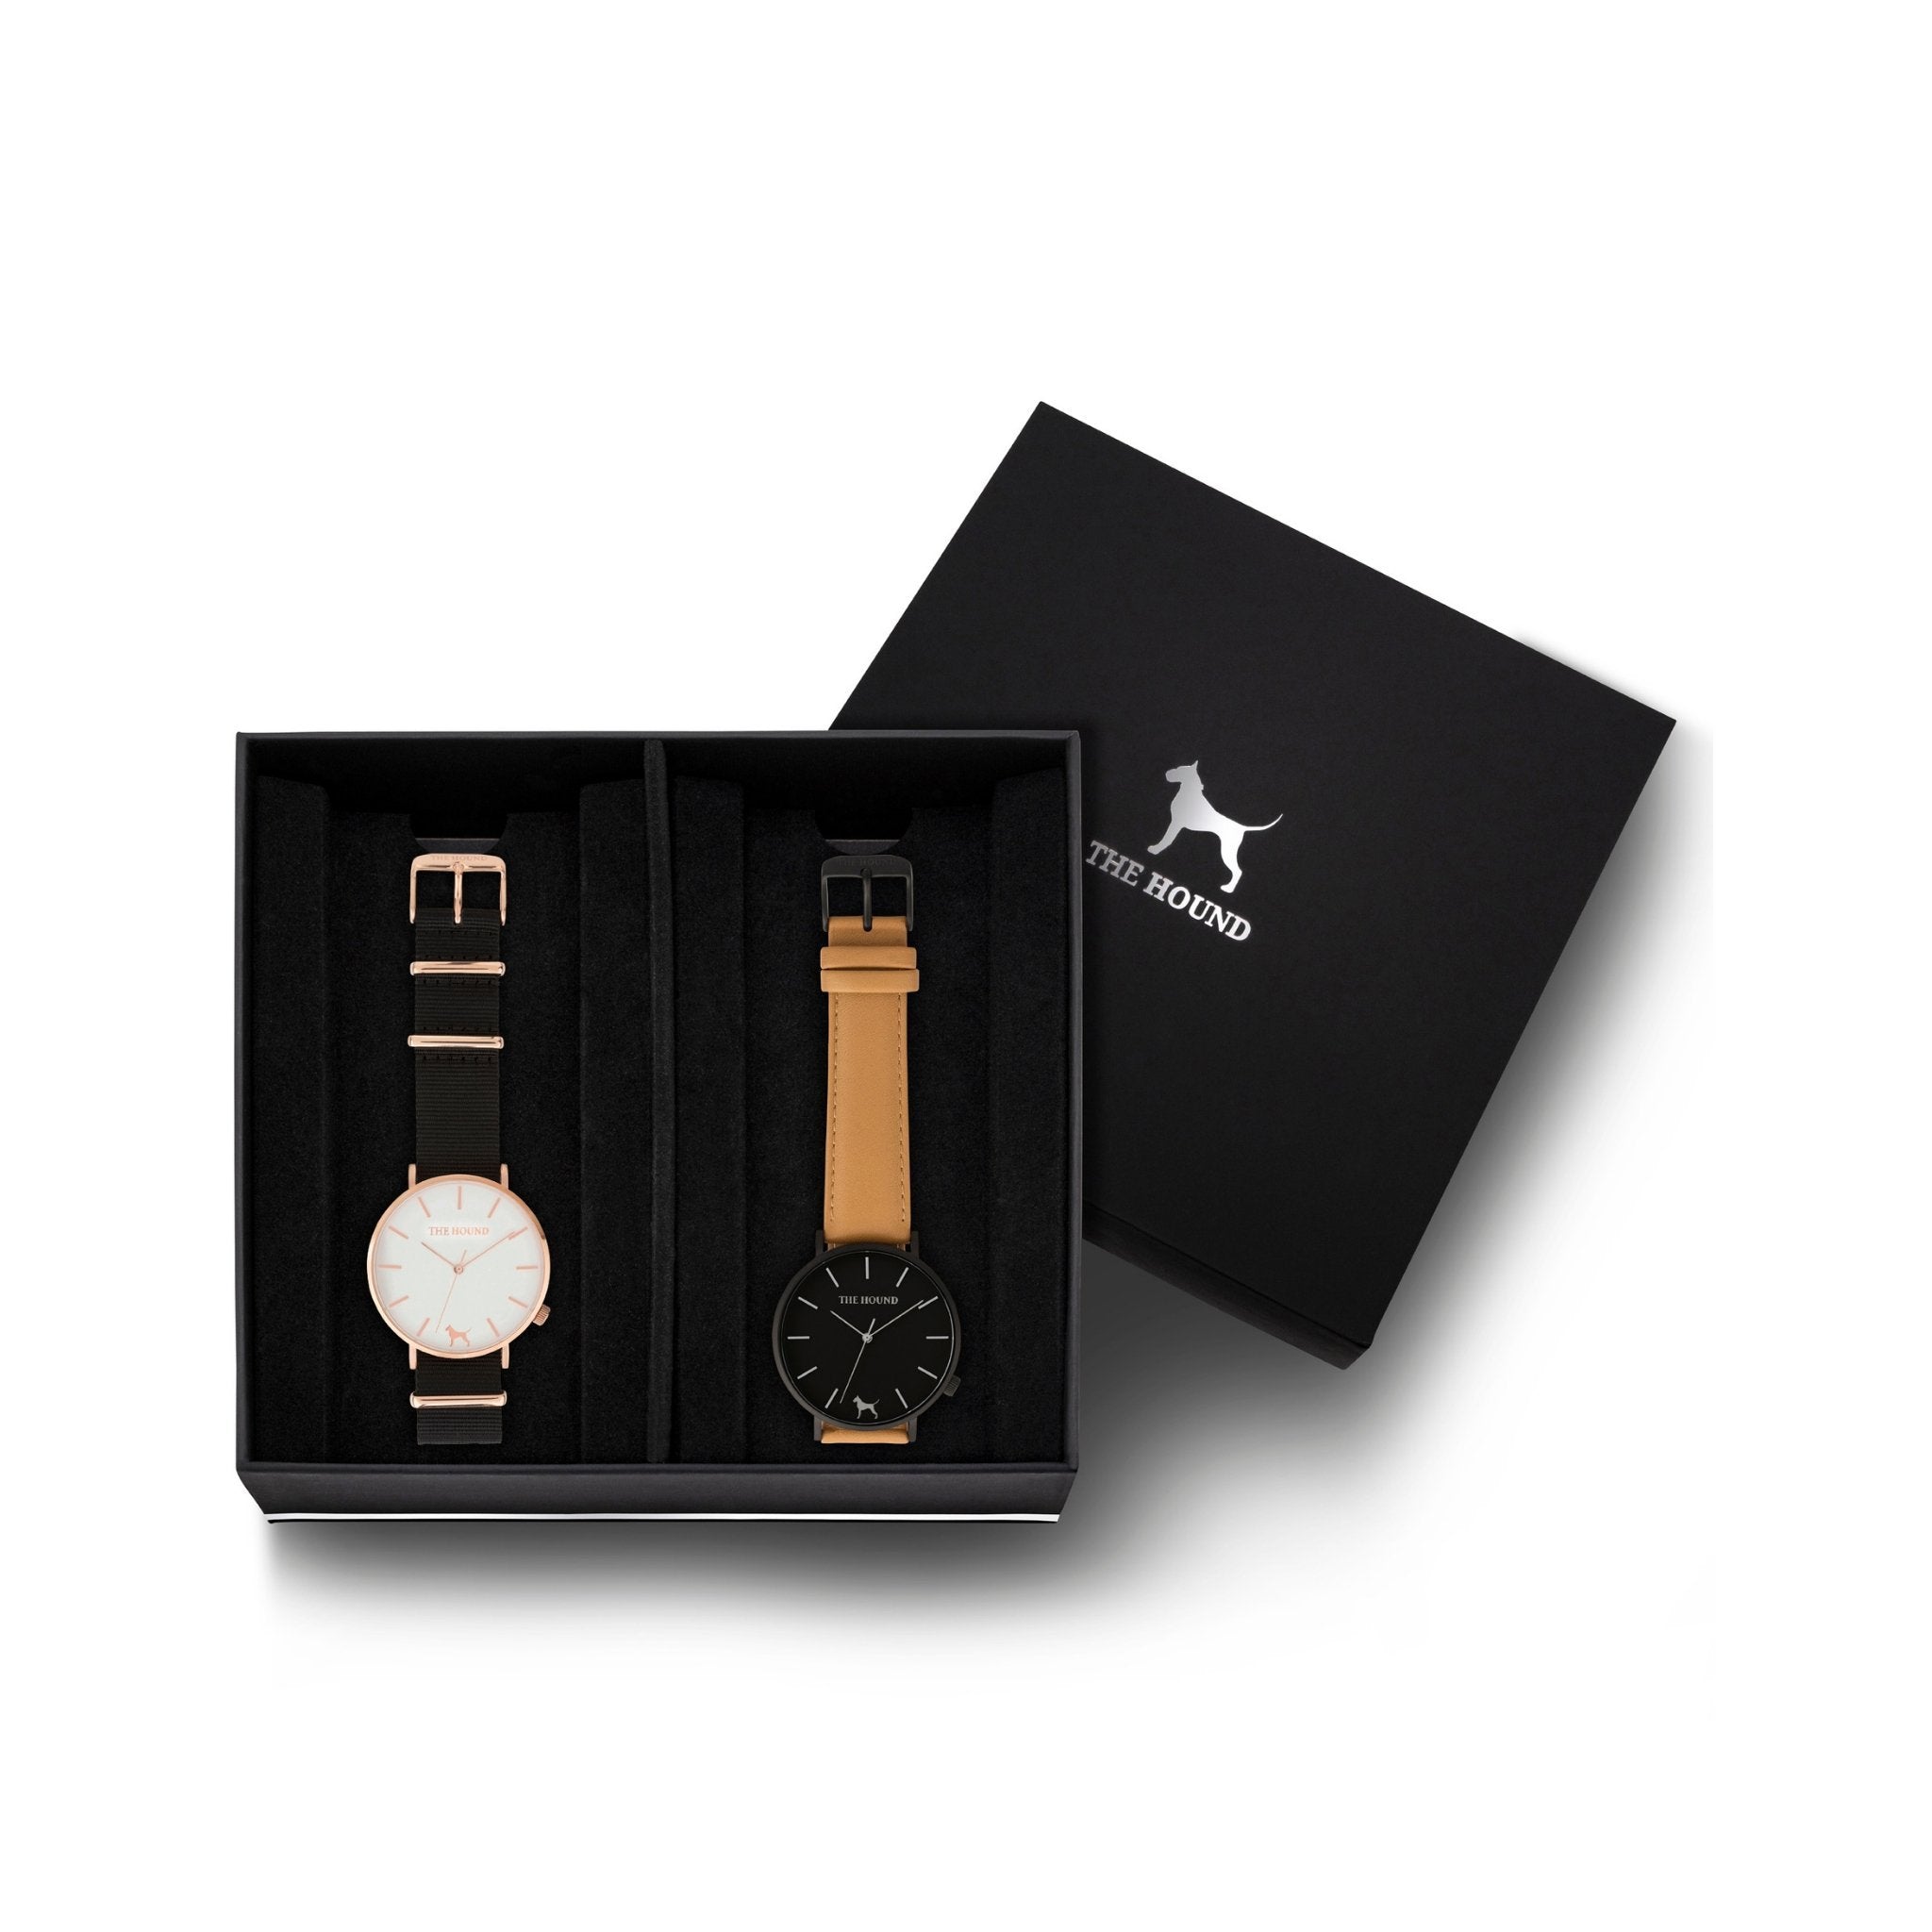 Custom gift set - Rose gold and white watch with black nato band and a matte black and black watch with stitched camel genuine leather band